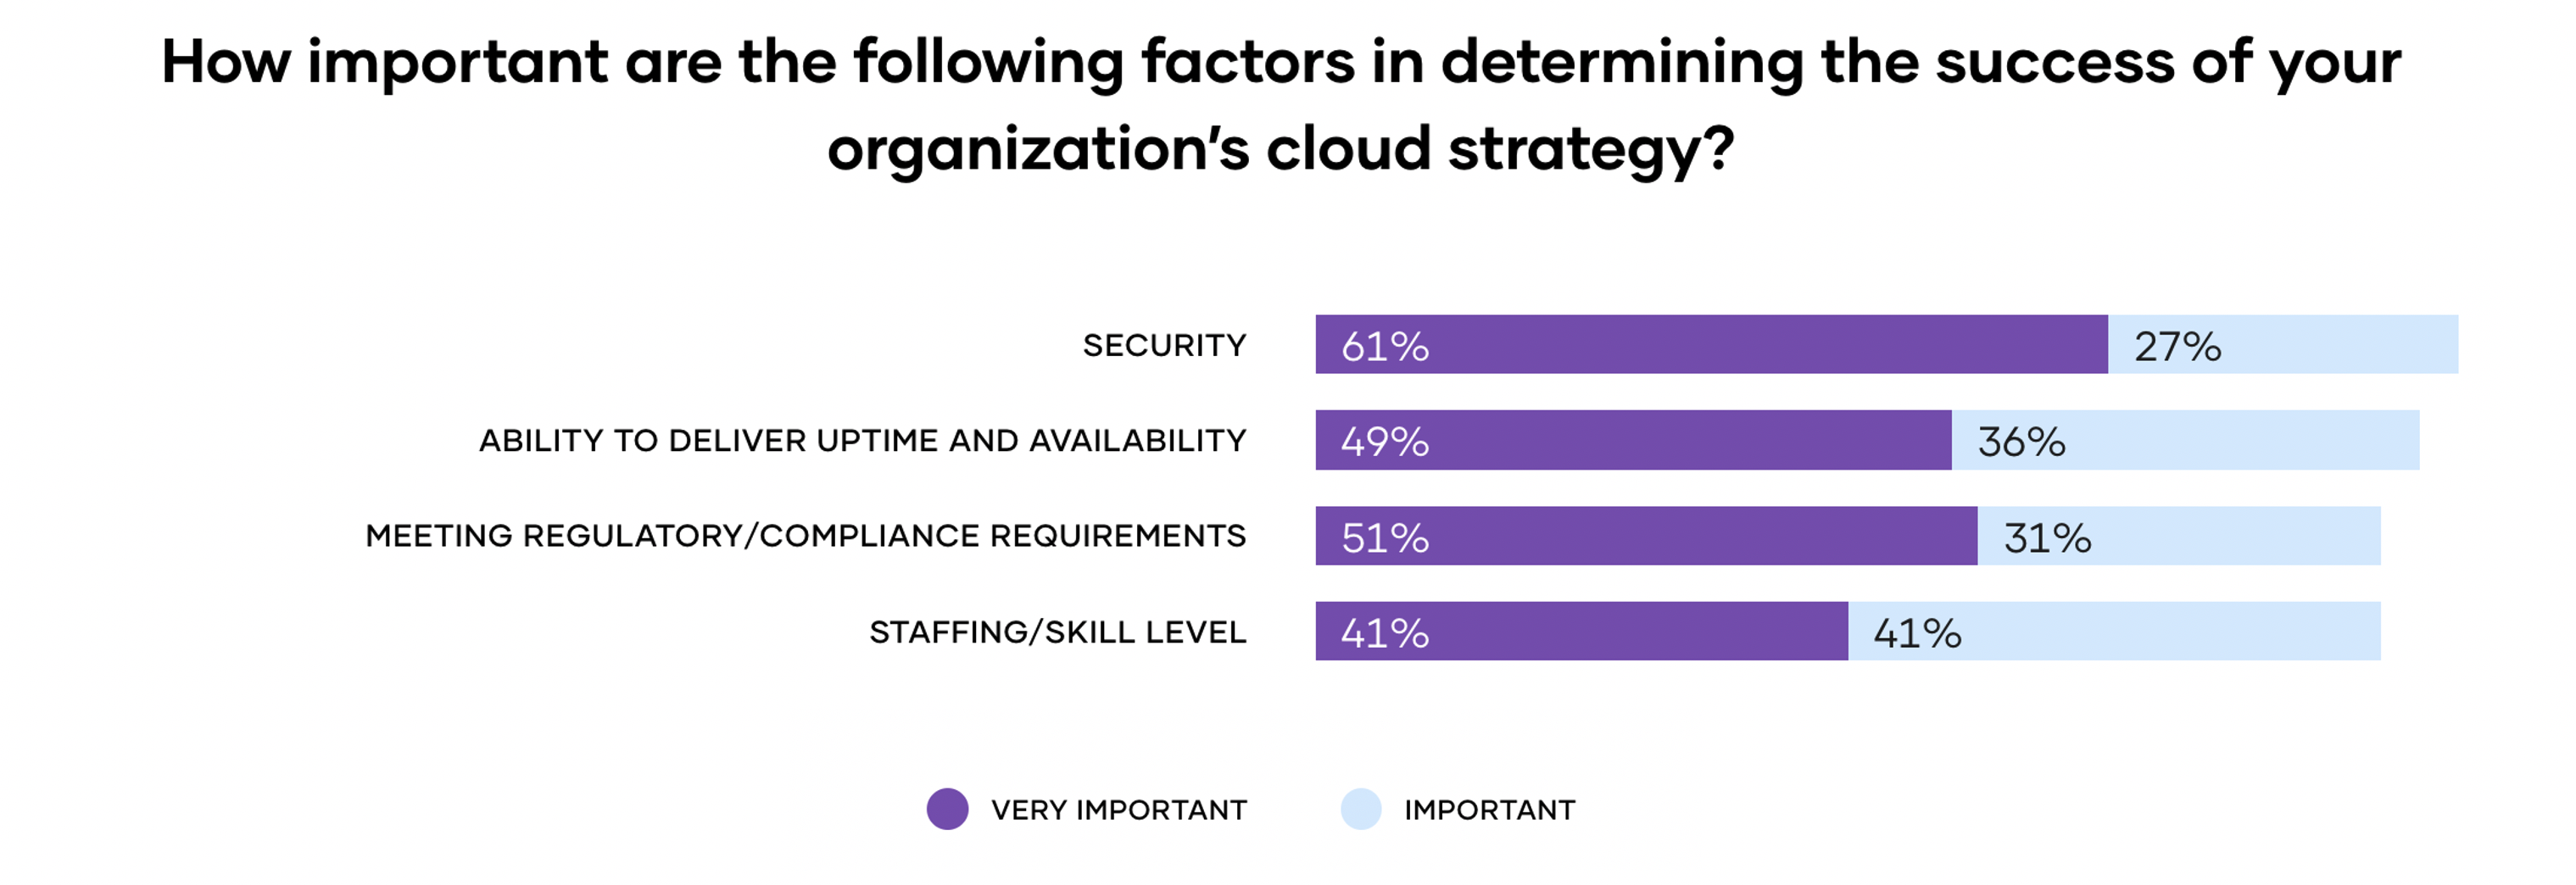 How important are these factors in determining cloud strategy success?